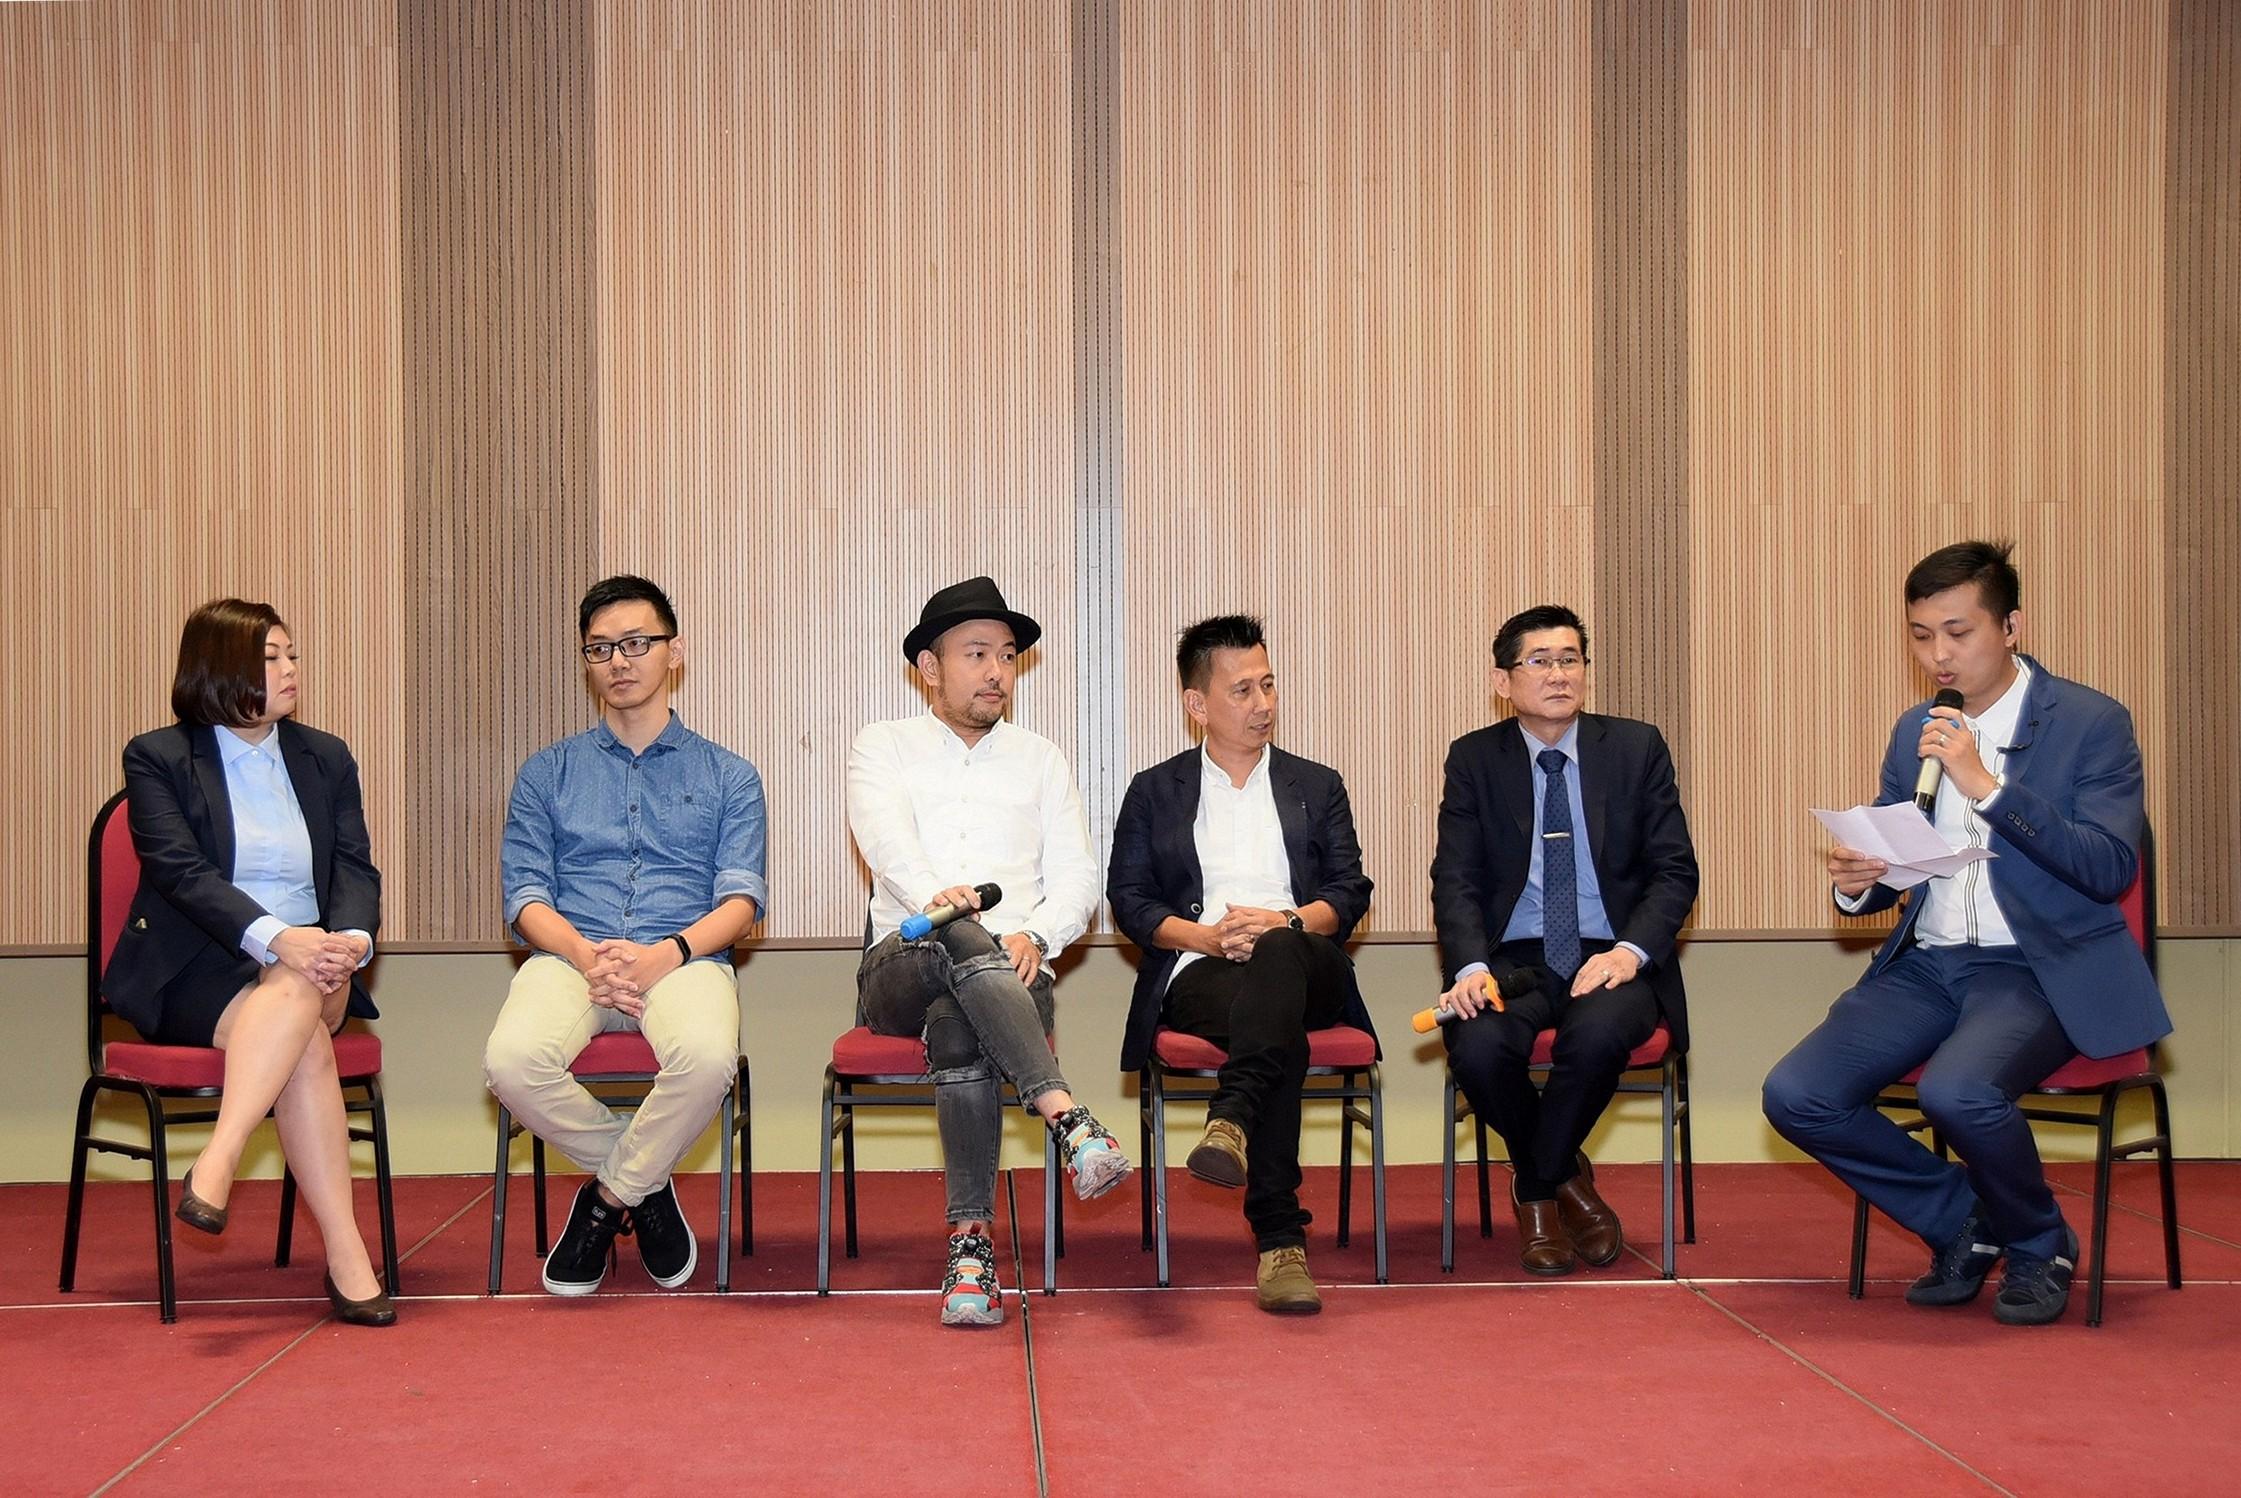 From left: Dr Lai, Wong, Leow, Alex Tan, Dato’ Goh and Koh